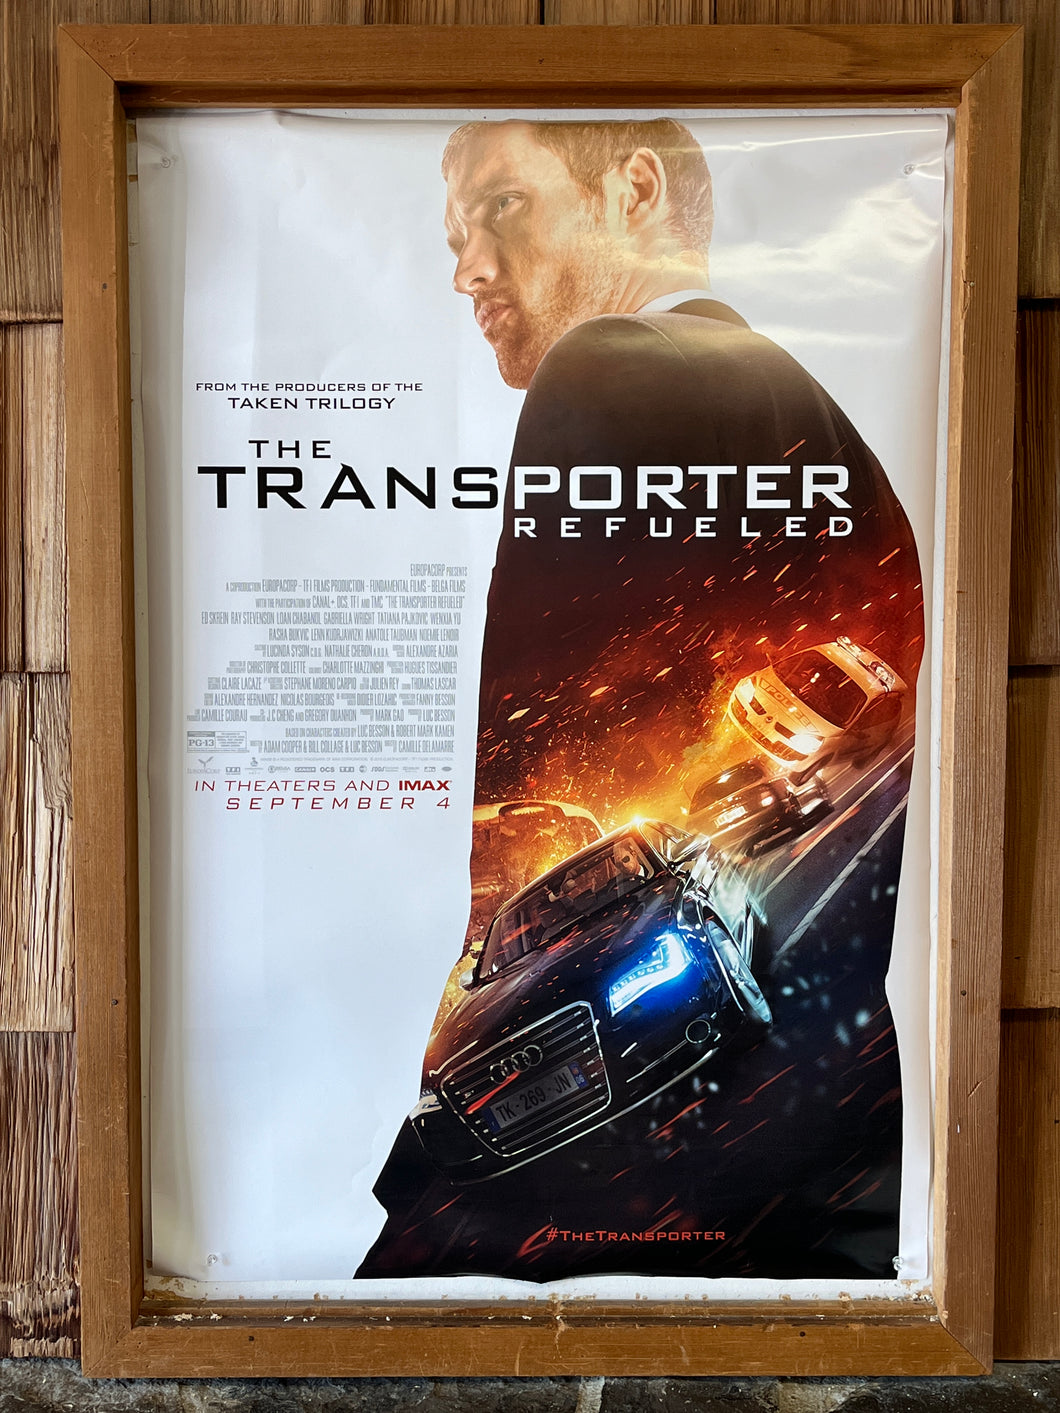 Transporter Refueled, The (2015)